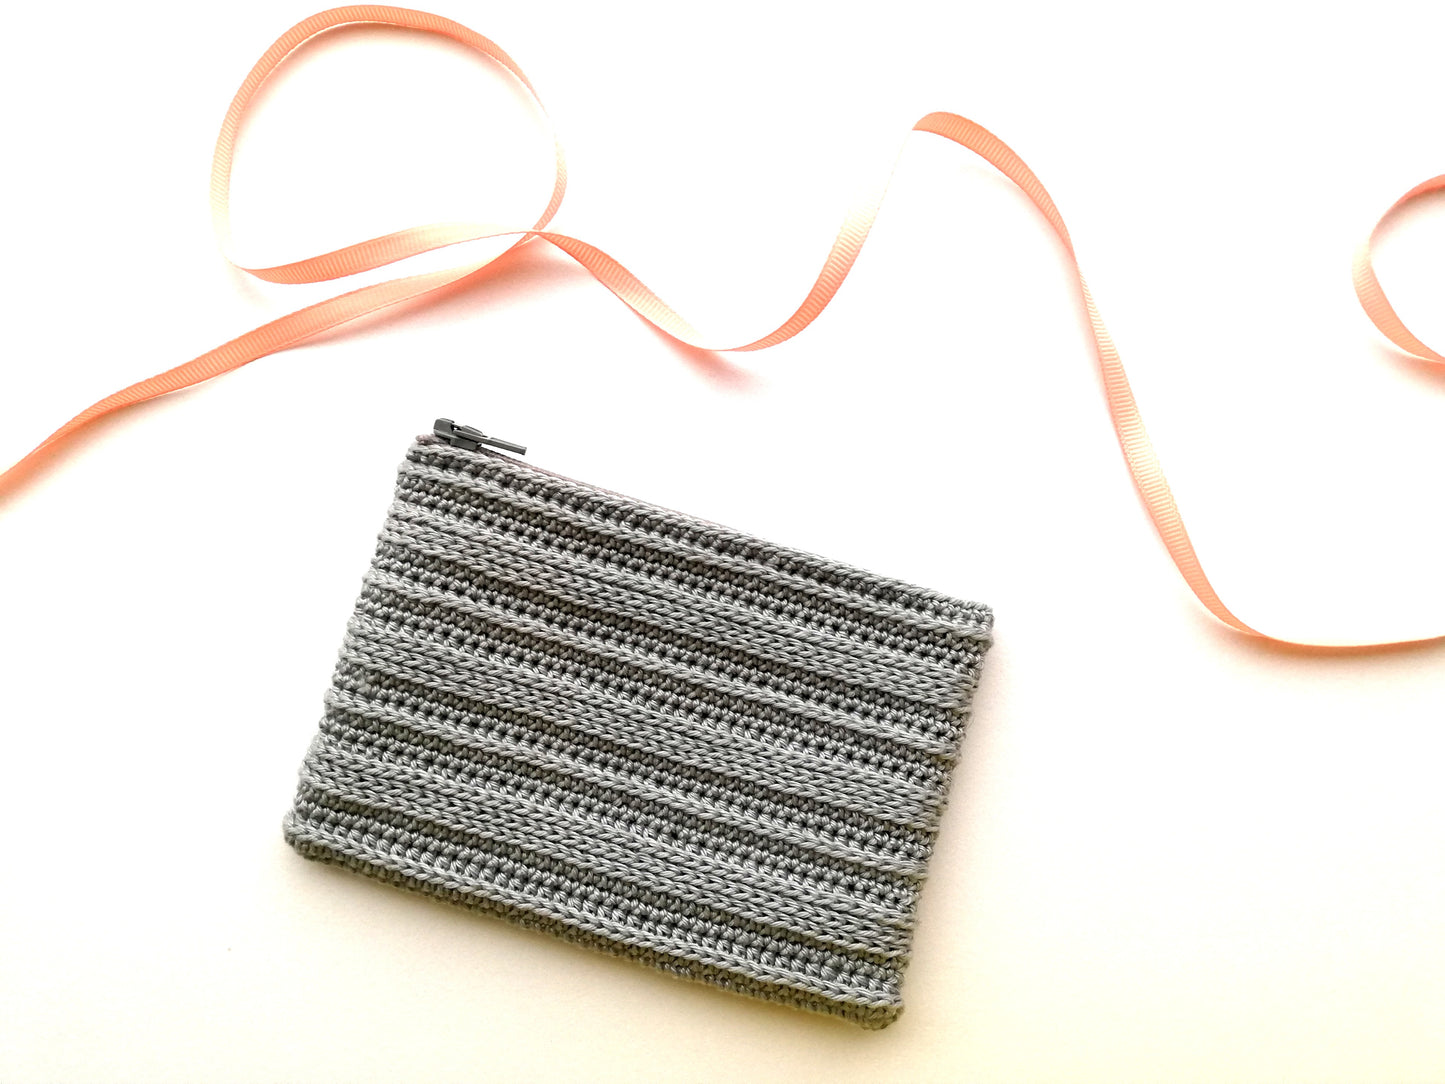 Textured striped pouch